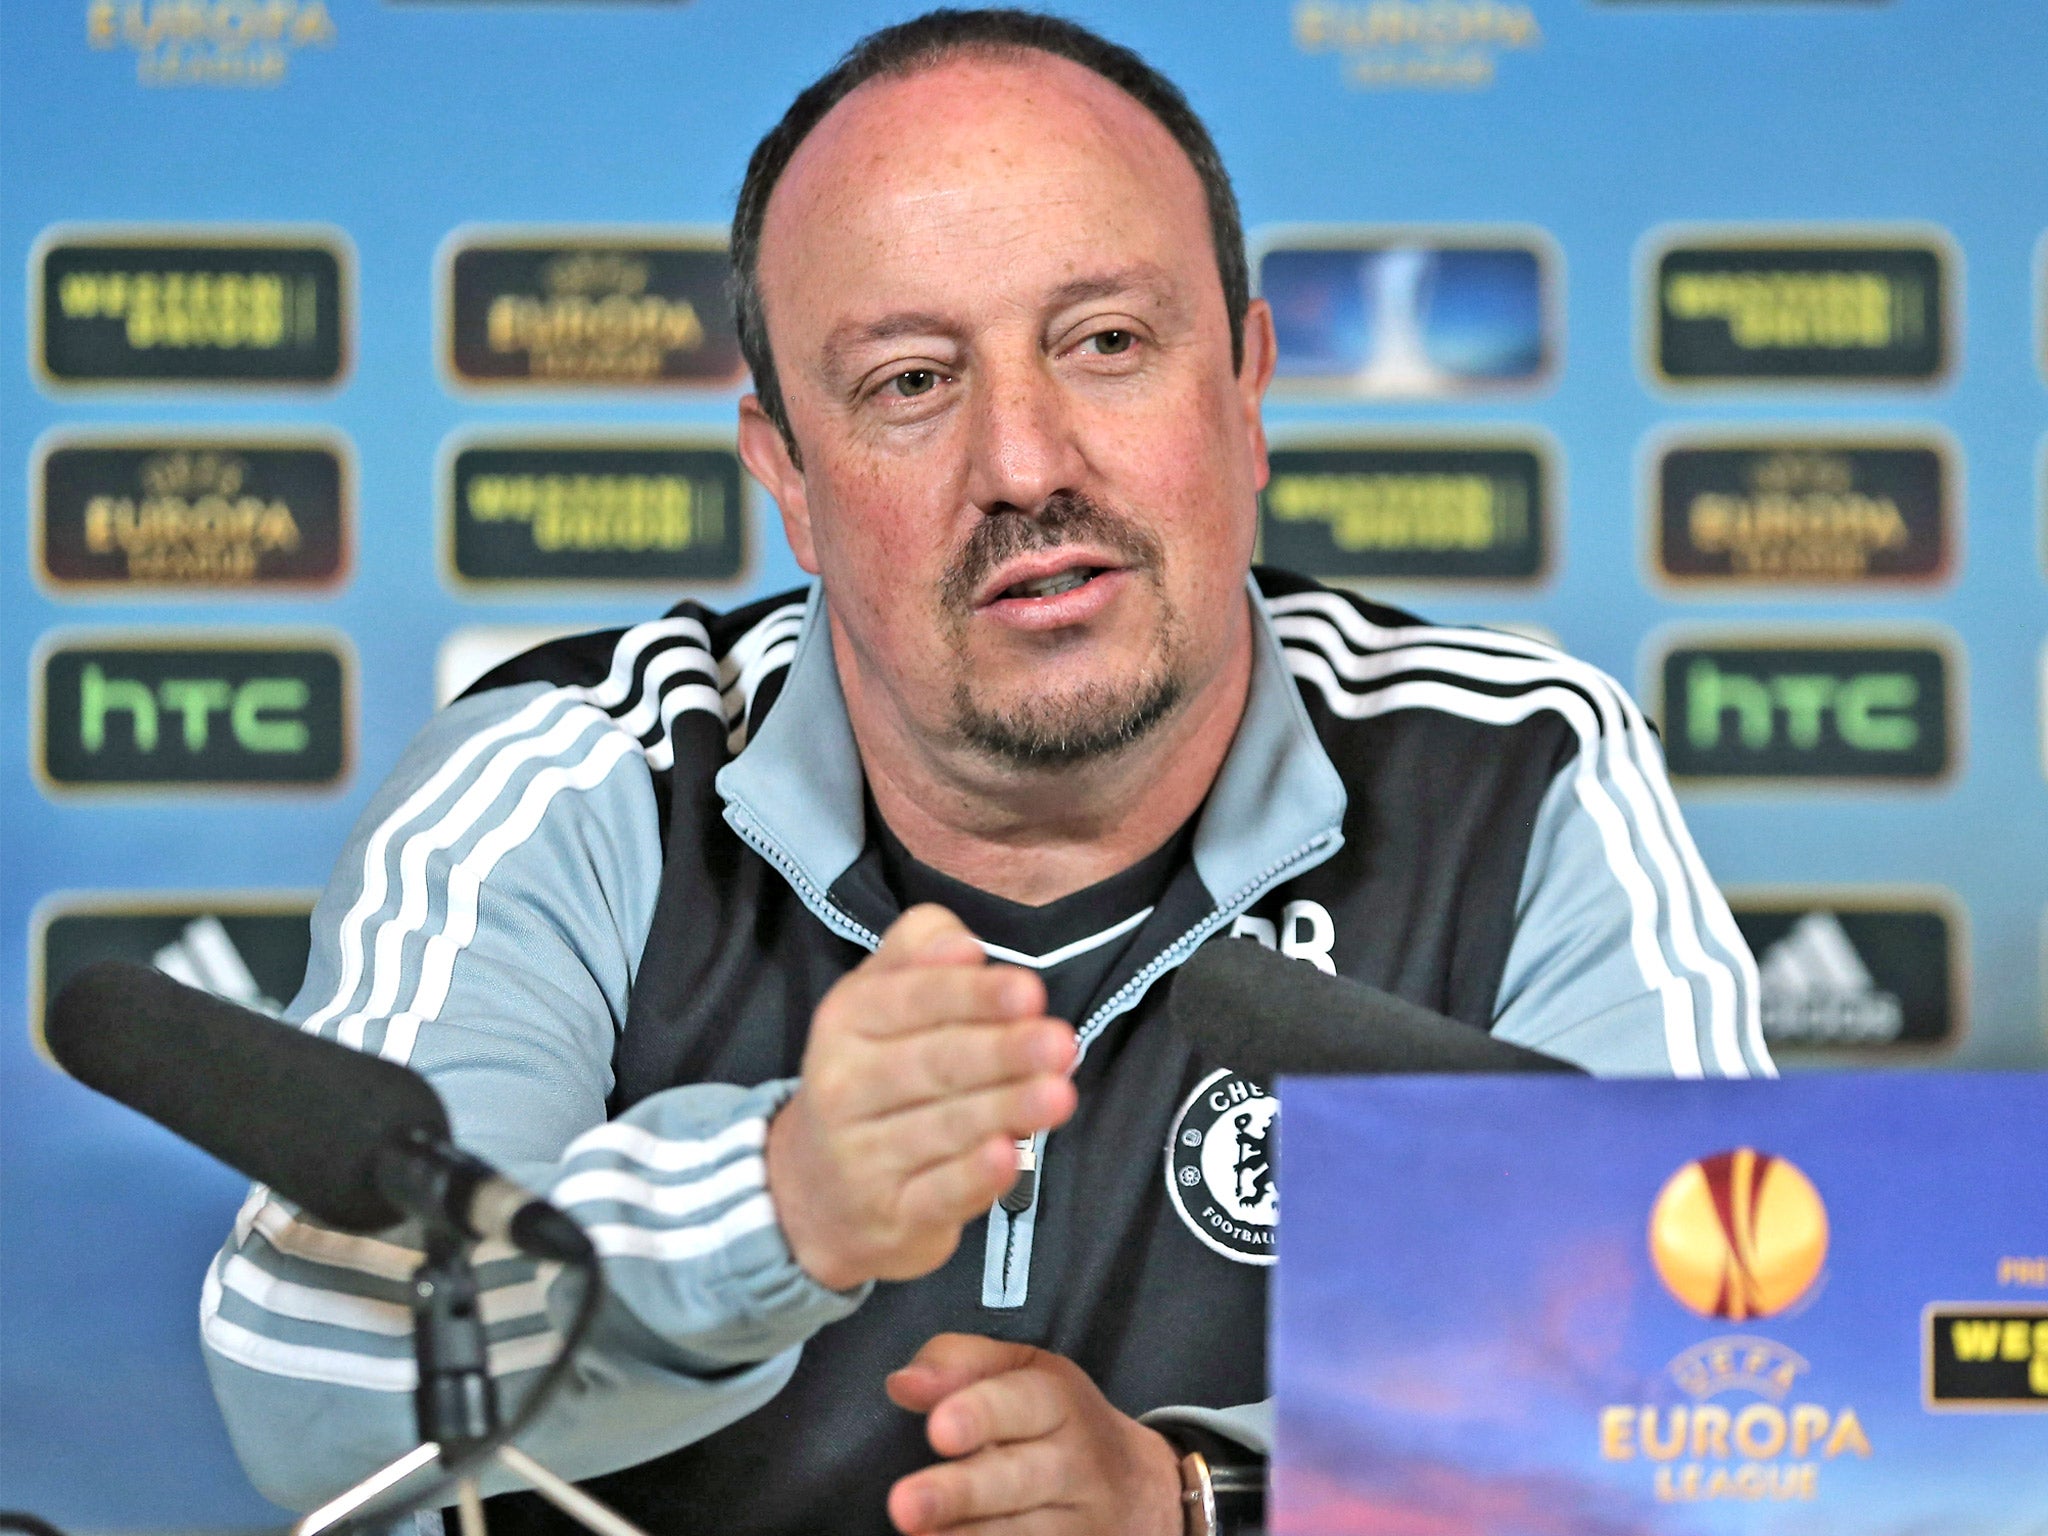 Rafael Benitez says he wants to challenge for trophies here